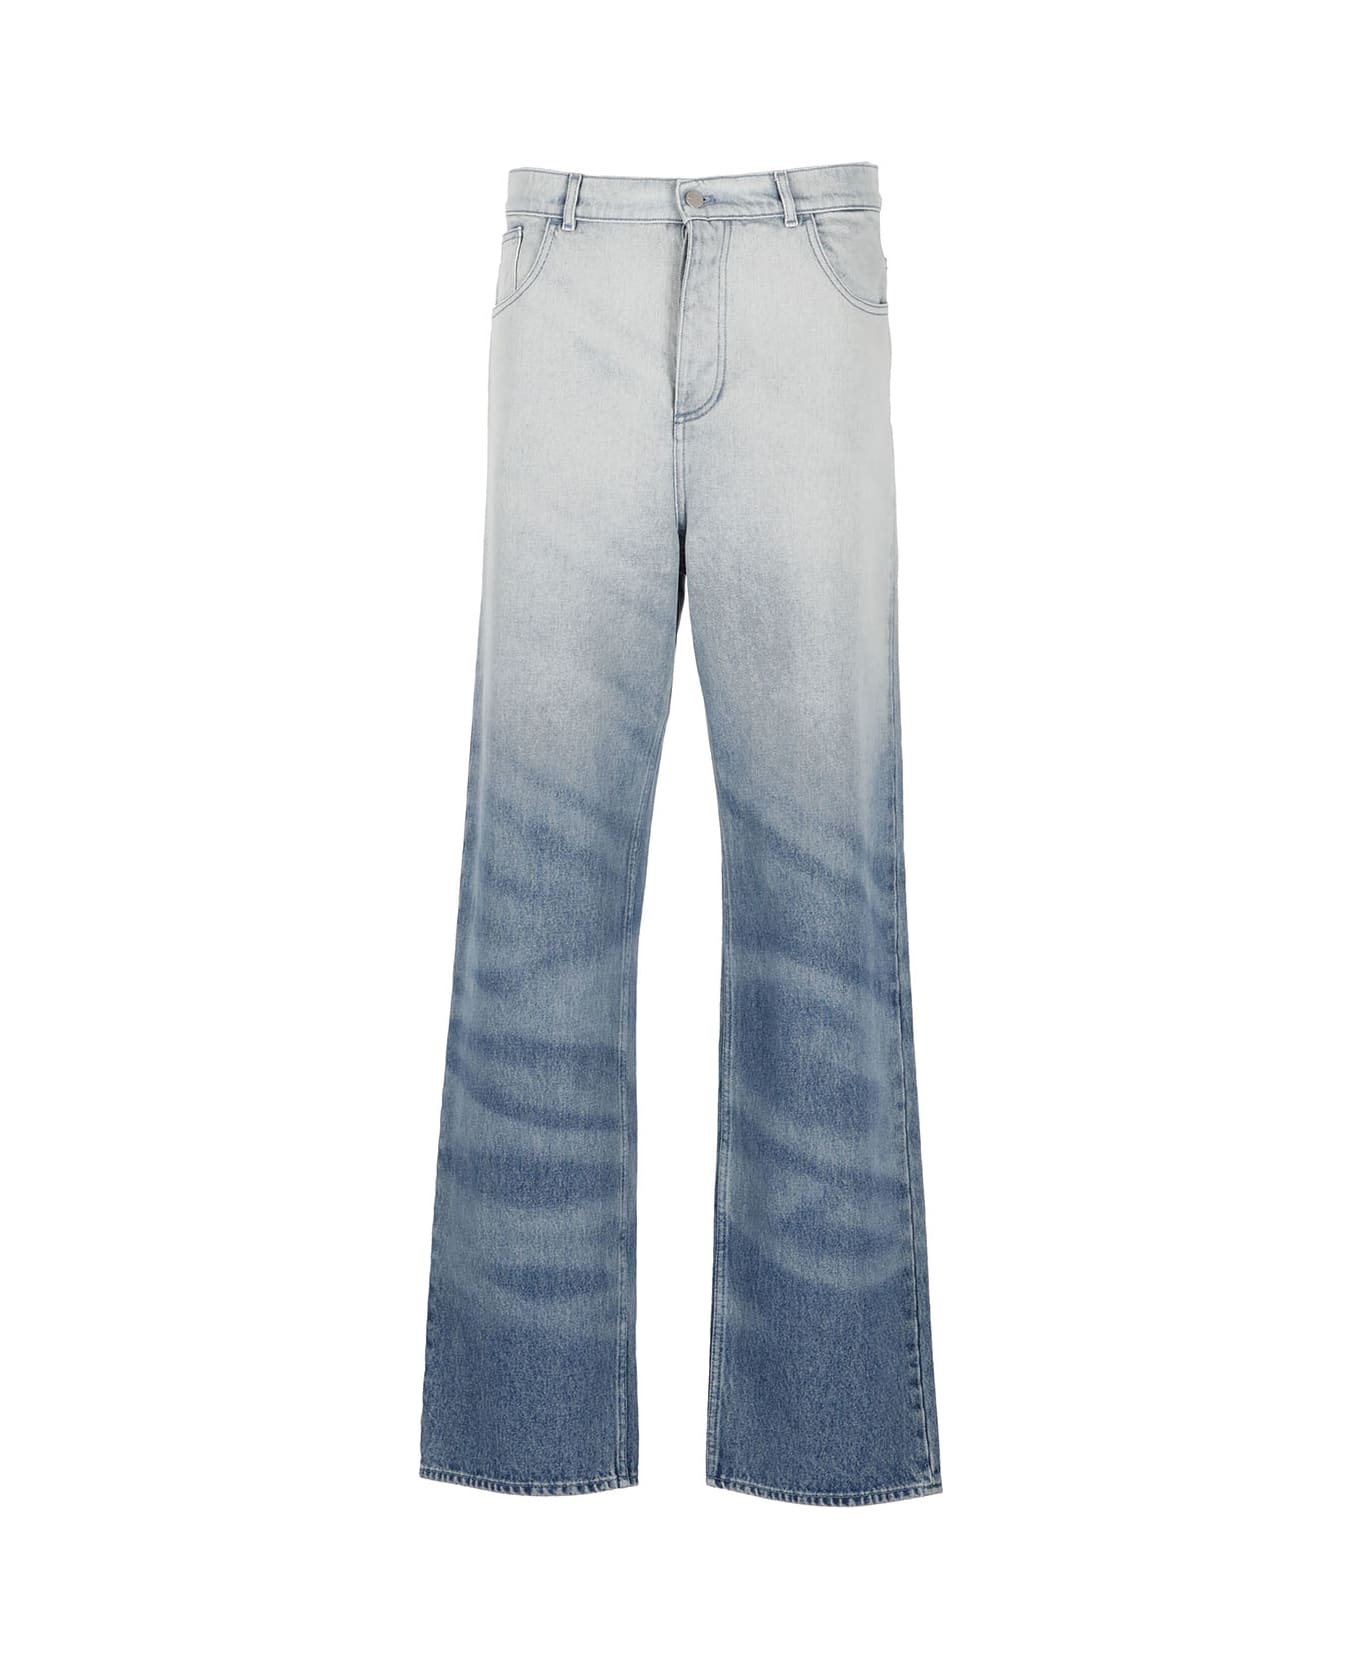 Light Blue Wrinkled Jeans With Rips And Paint Stains In Cotton Denim Man  Purple Brand